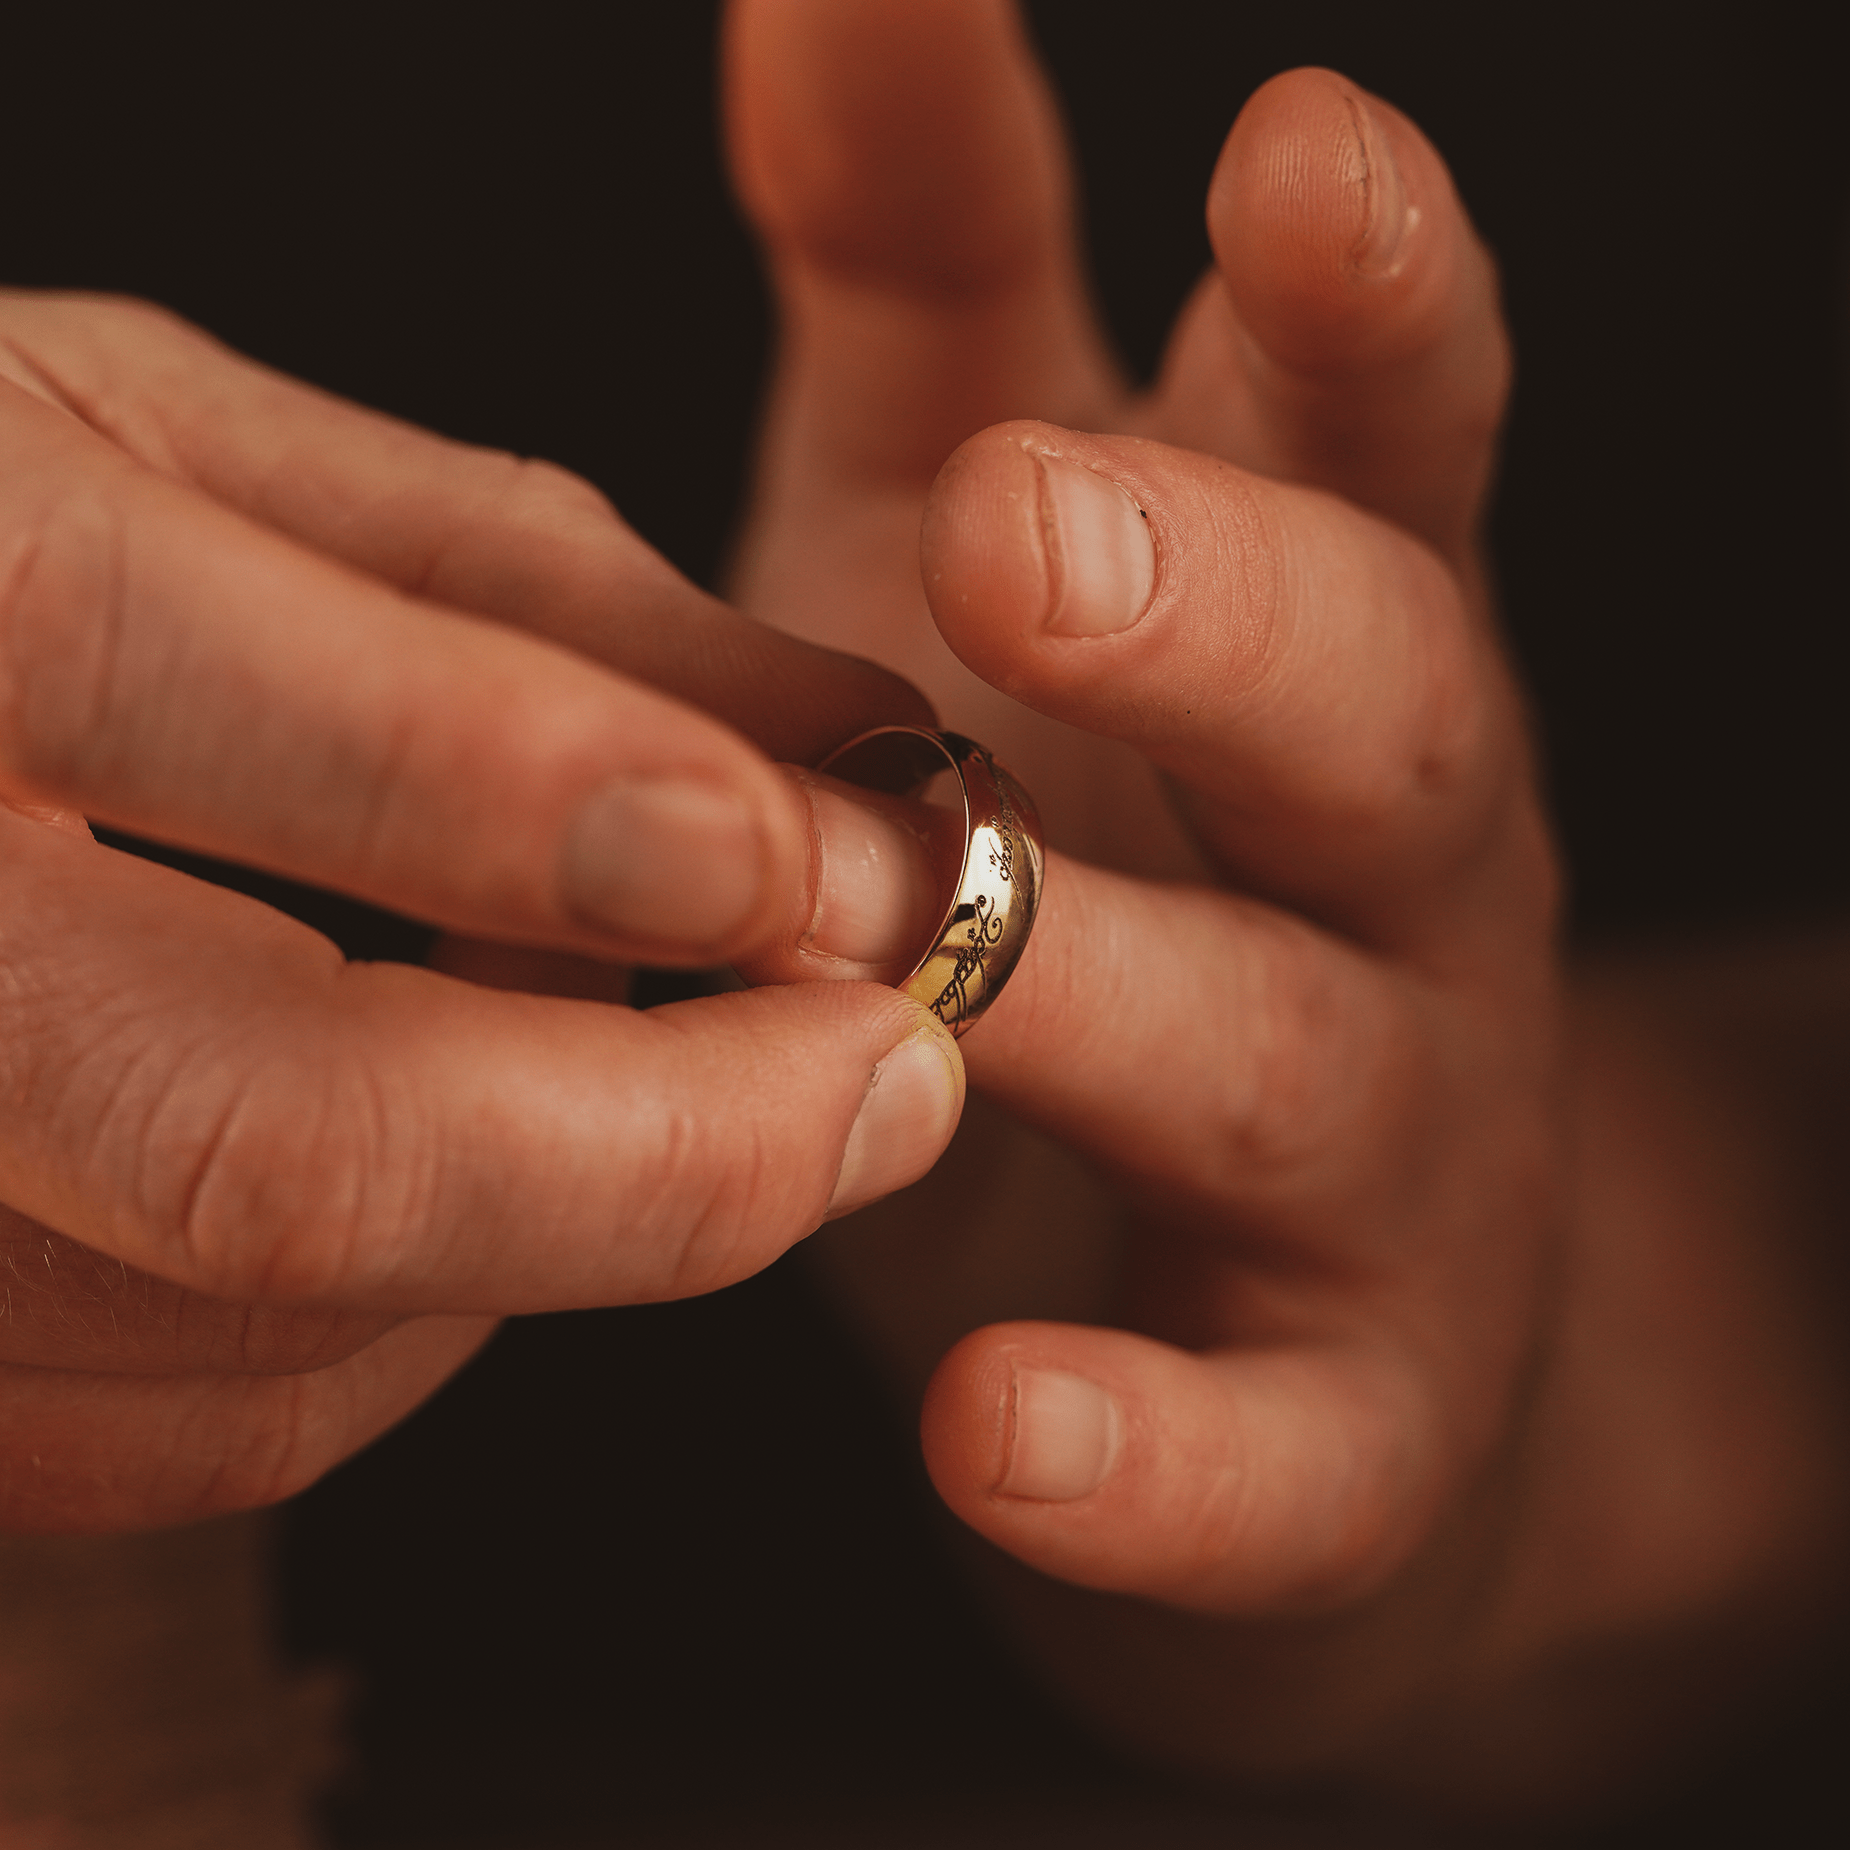 How to Make a Ring Fit Better – Manly Bands